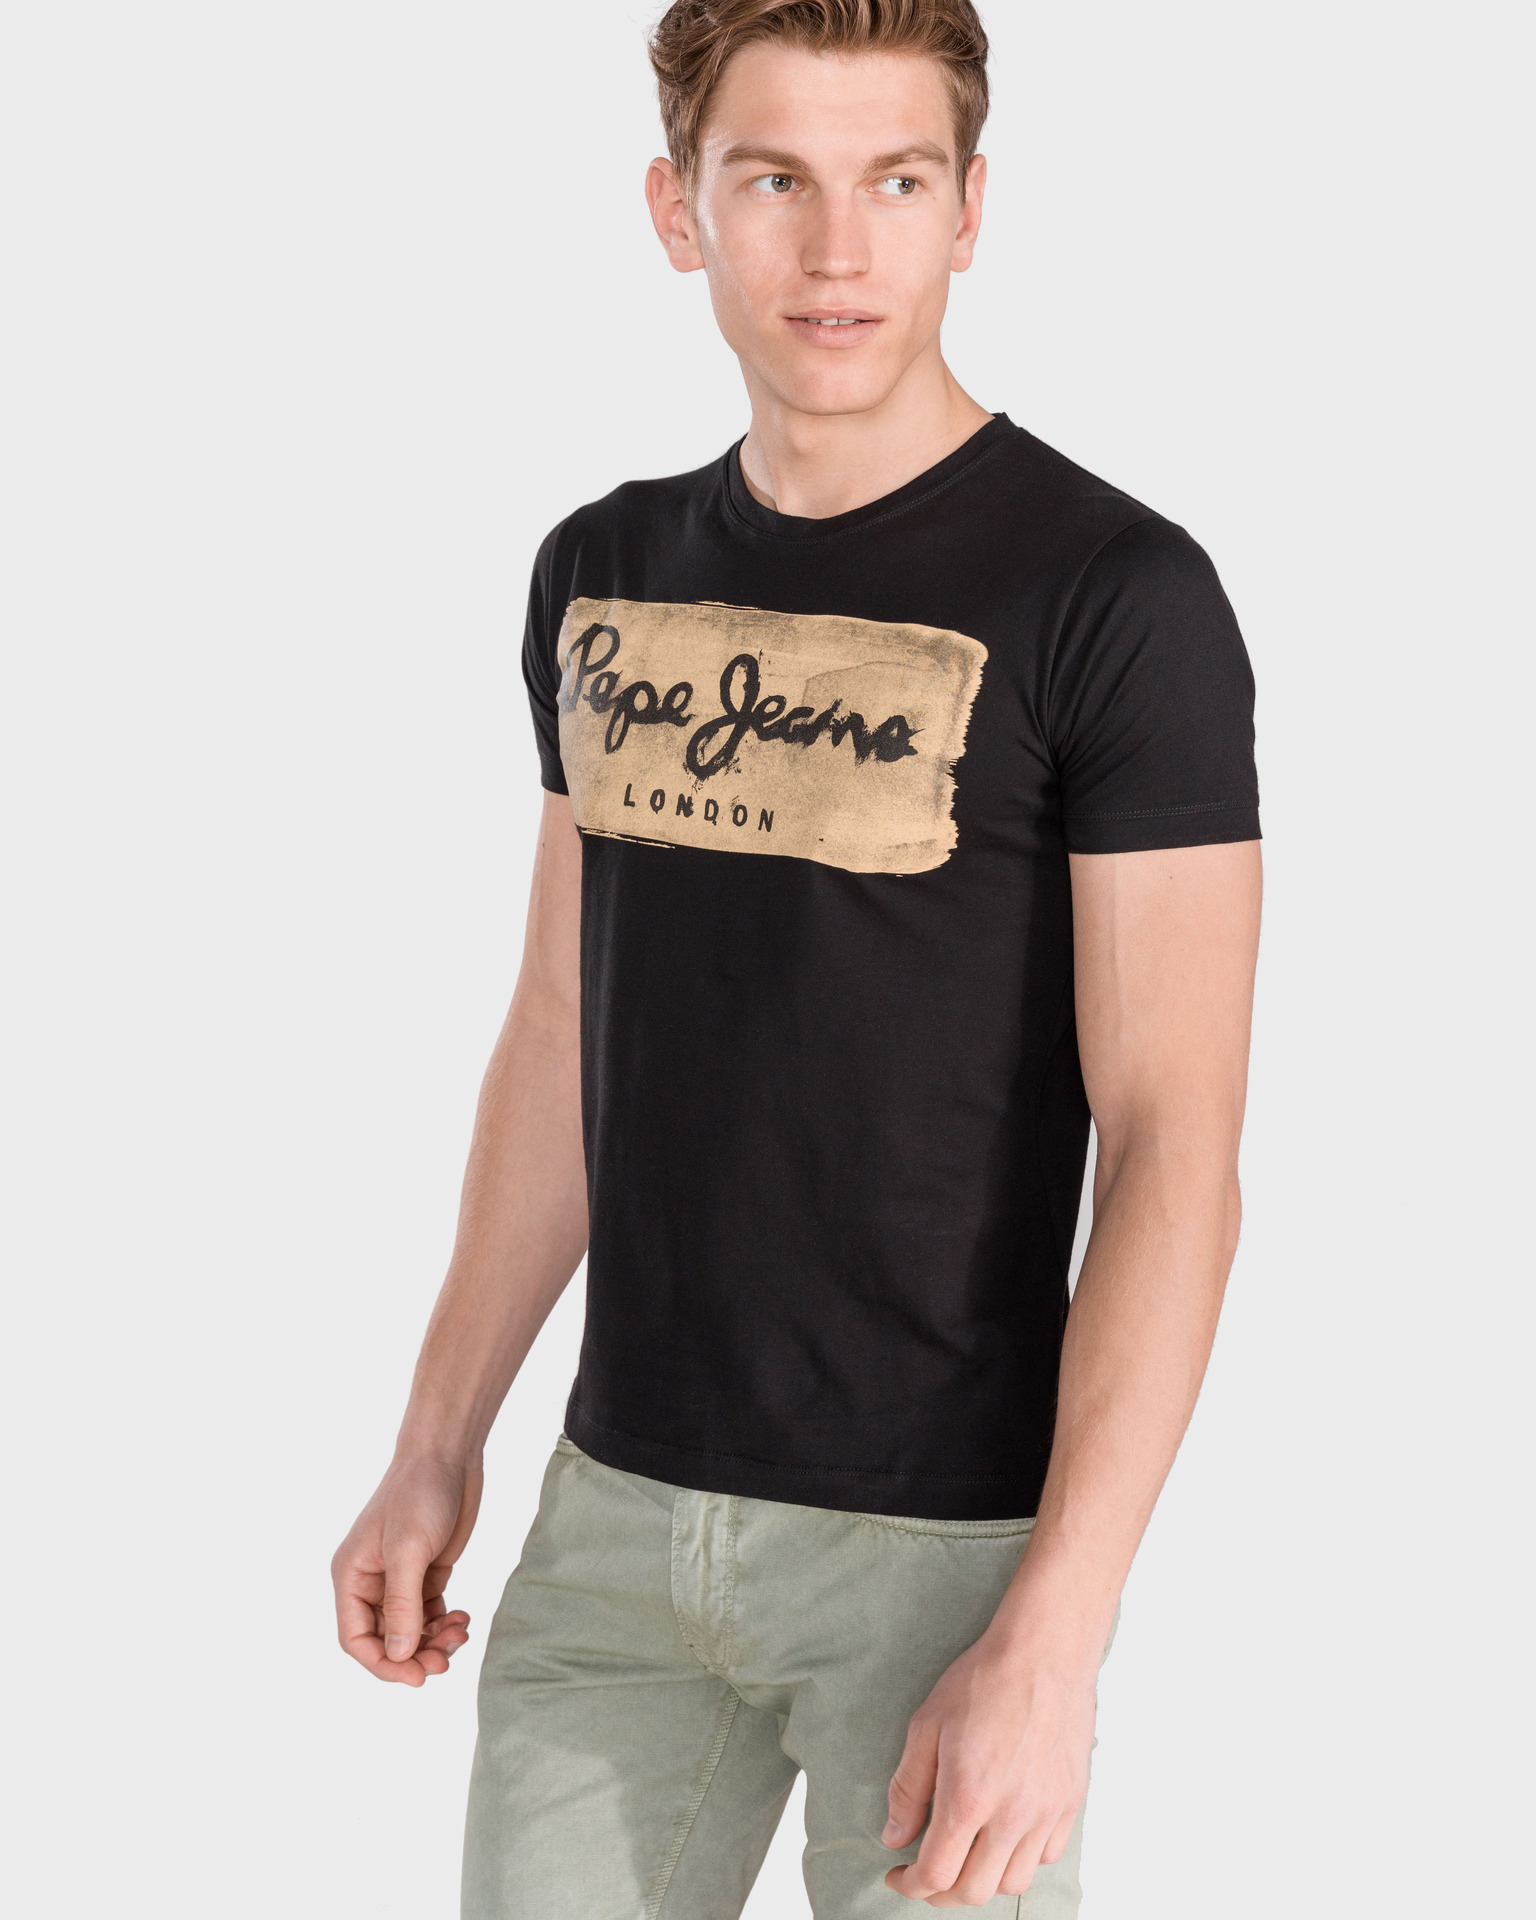 Aggregate more than 107 pepe jeans black t shirt best